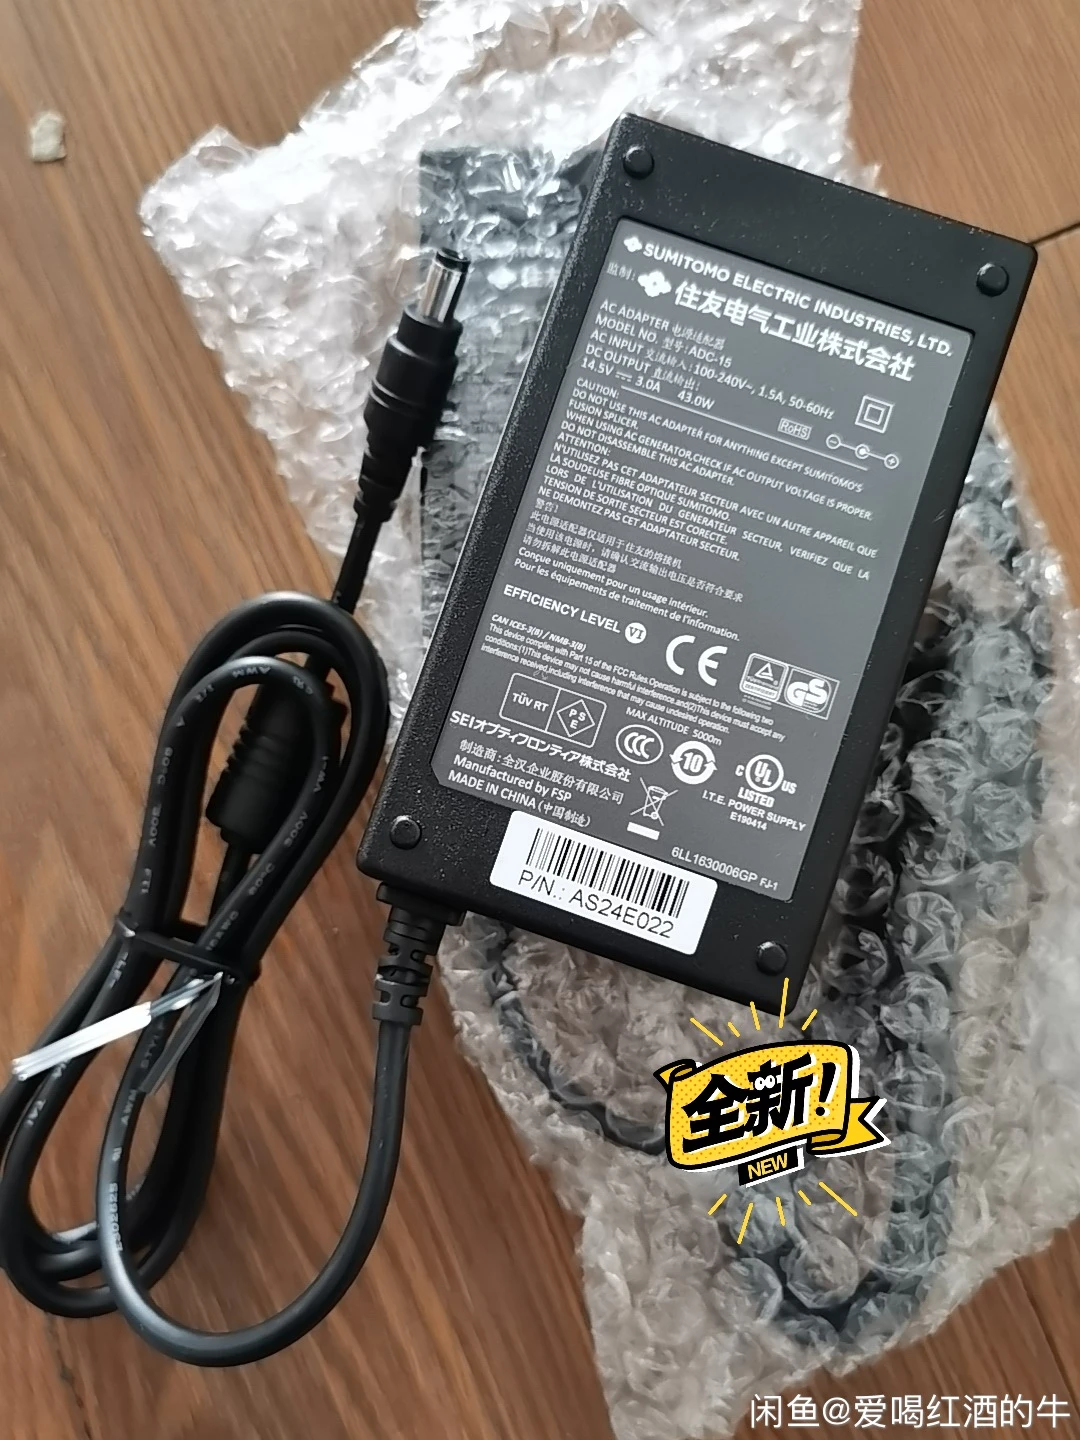 Free Shipping Original Sumitomo ADC-15 AC Adapter for T-400S T400S T400 T-25e T-201 T-201e Fiber Fusion Splicer Battery Charger sc fast connector